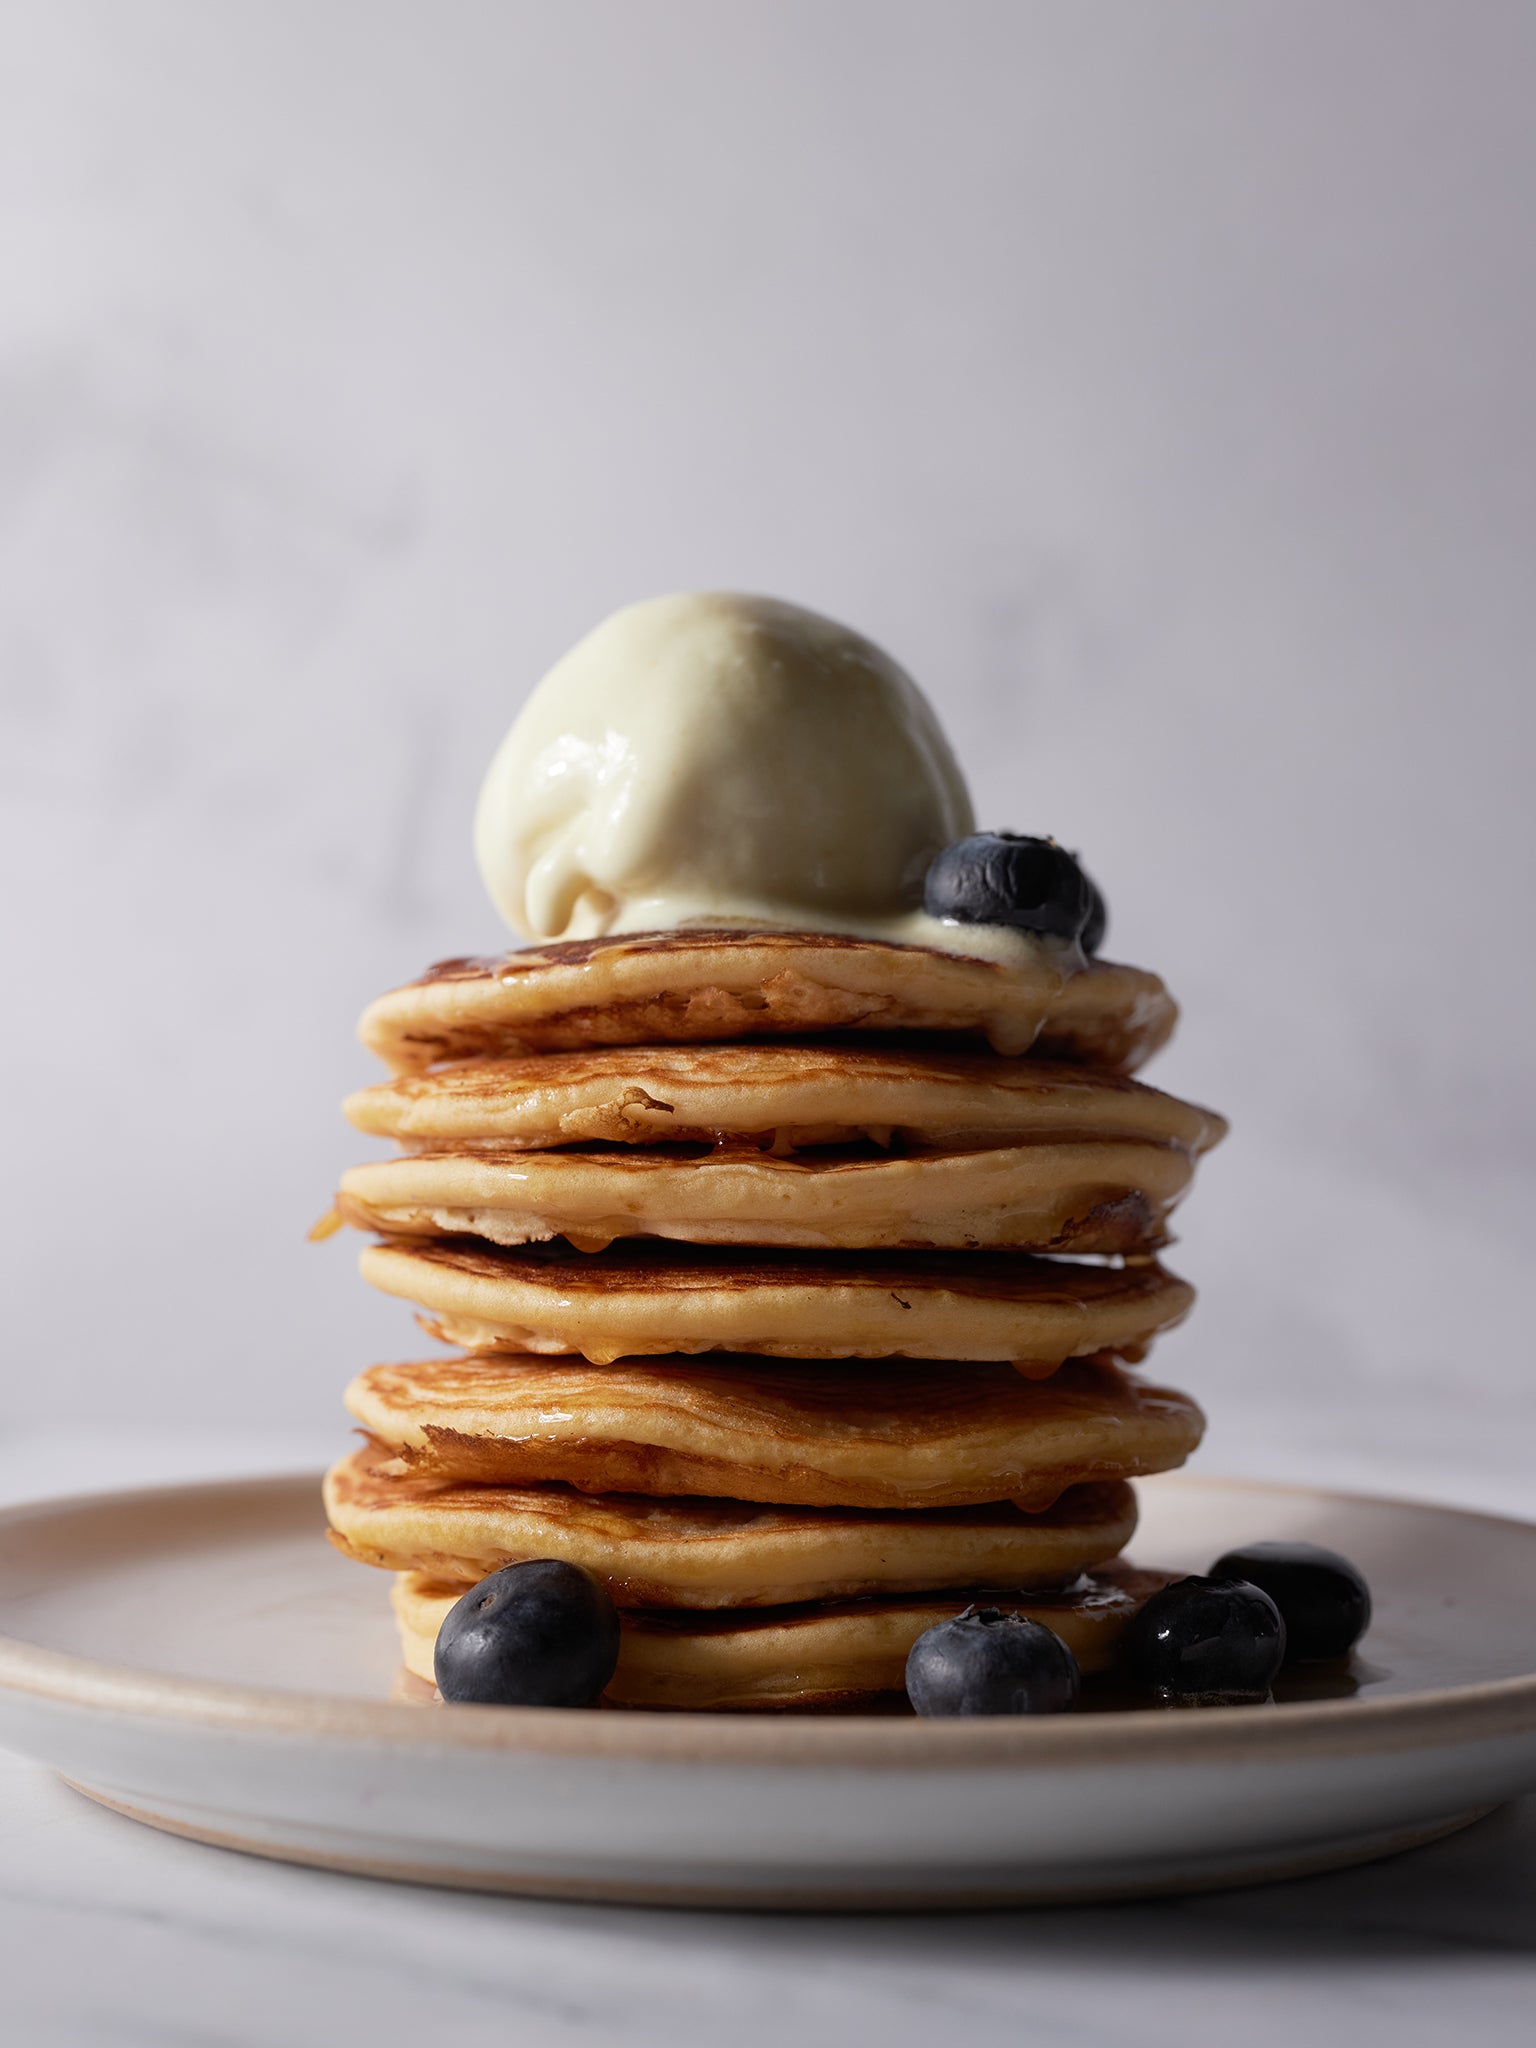 Enjoy all the indulgence of traditional pancakes, but with an added lightness